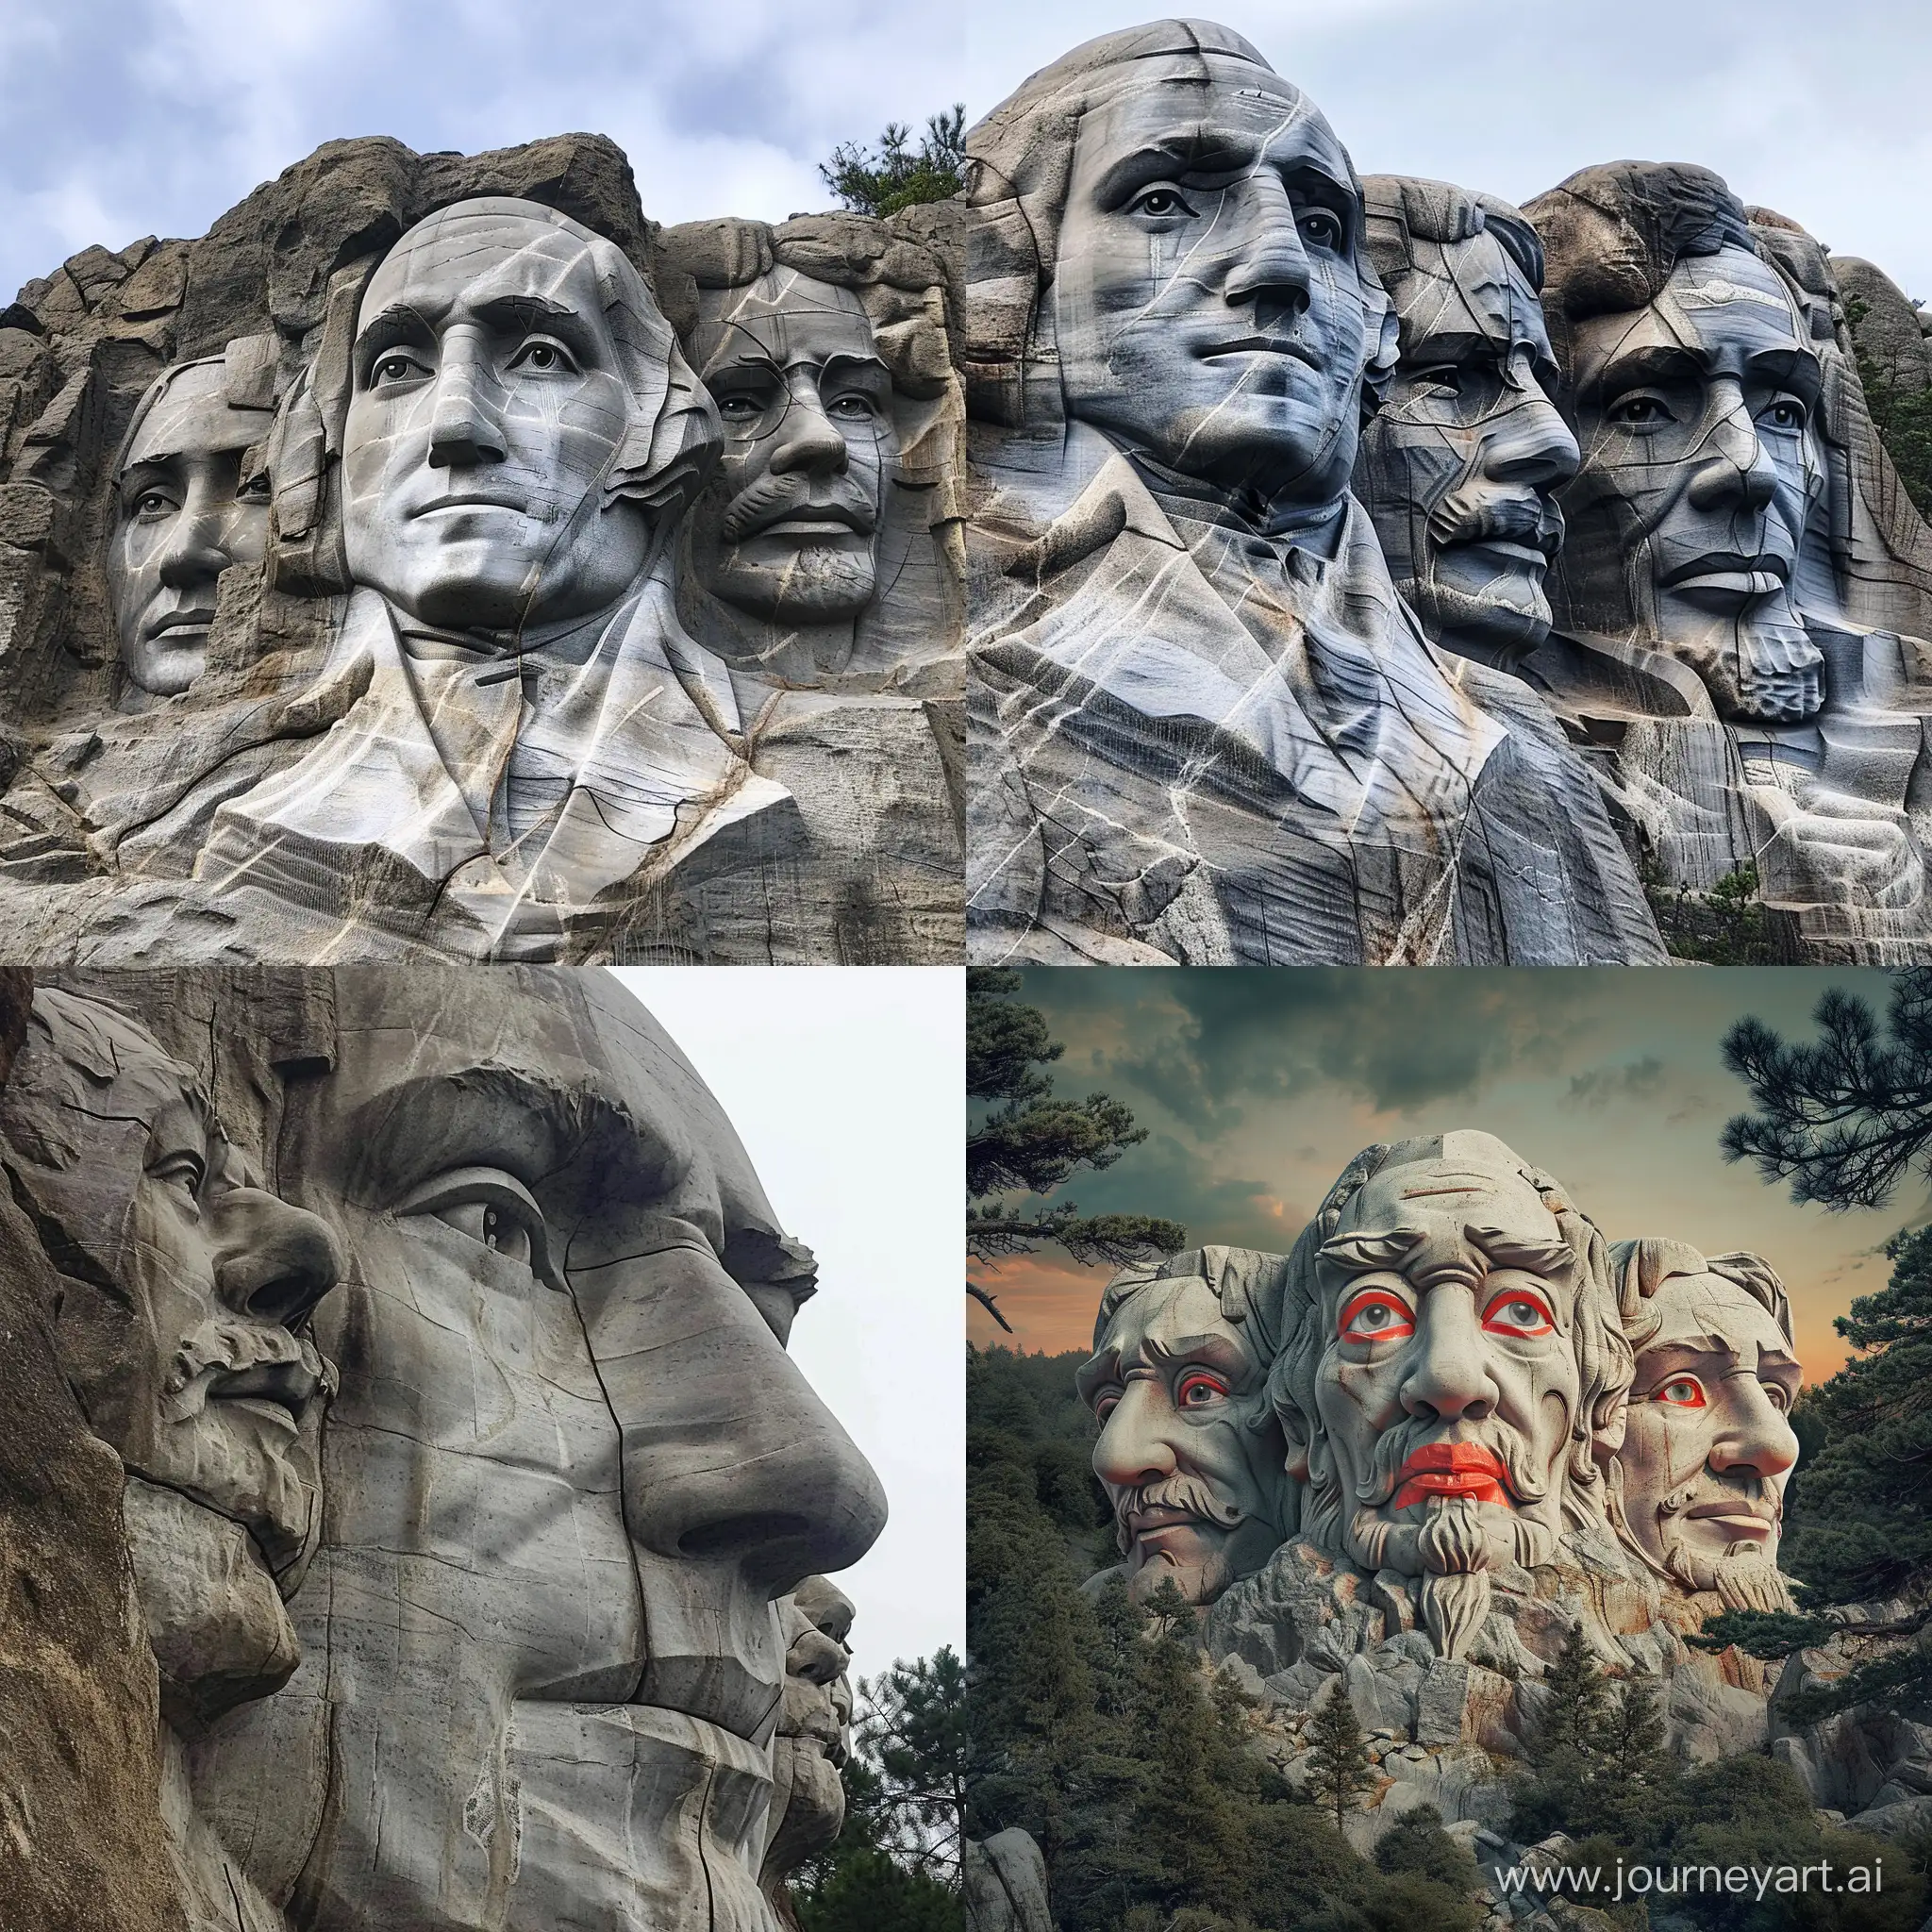 Art: Mount Rushmore, but add a Chinese face.